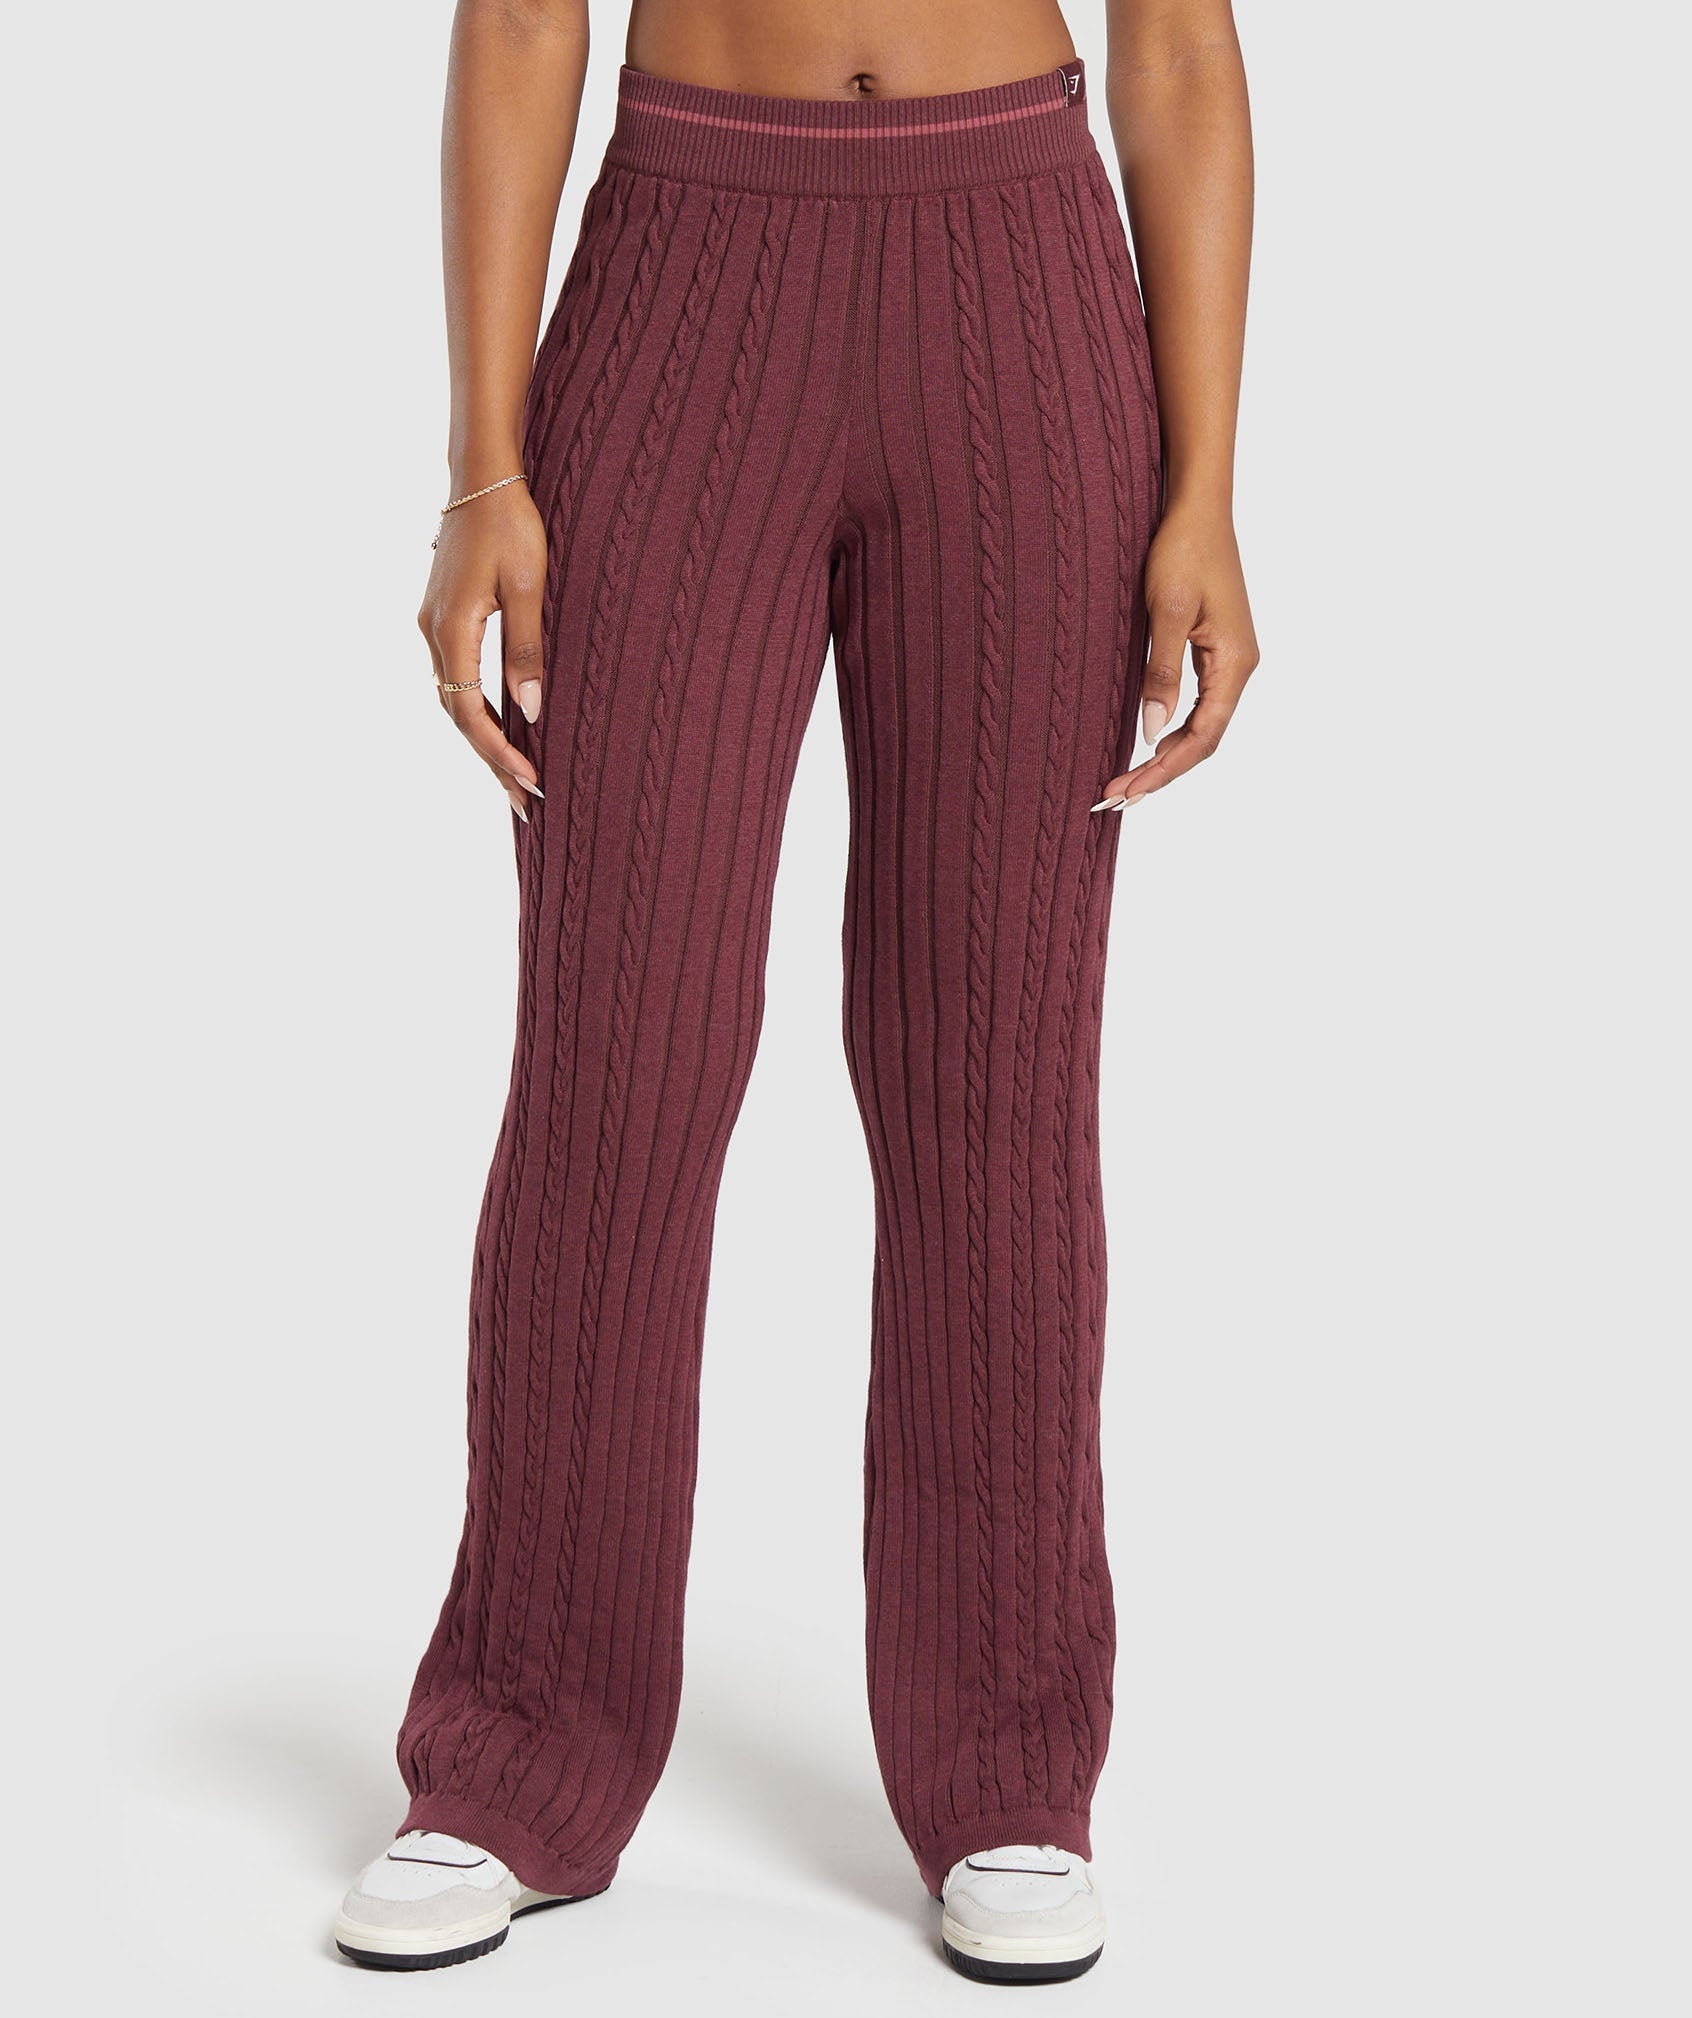 Rest Day Cable Knit Pants in Red - view 1